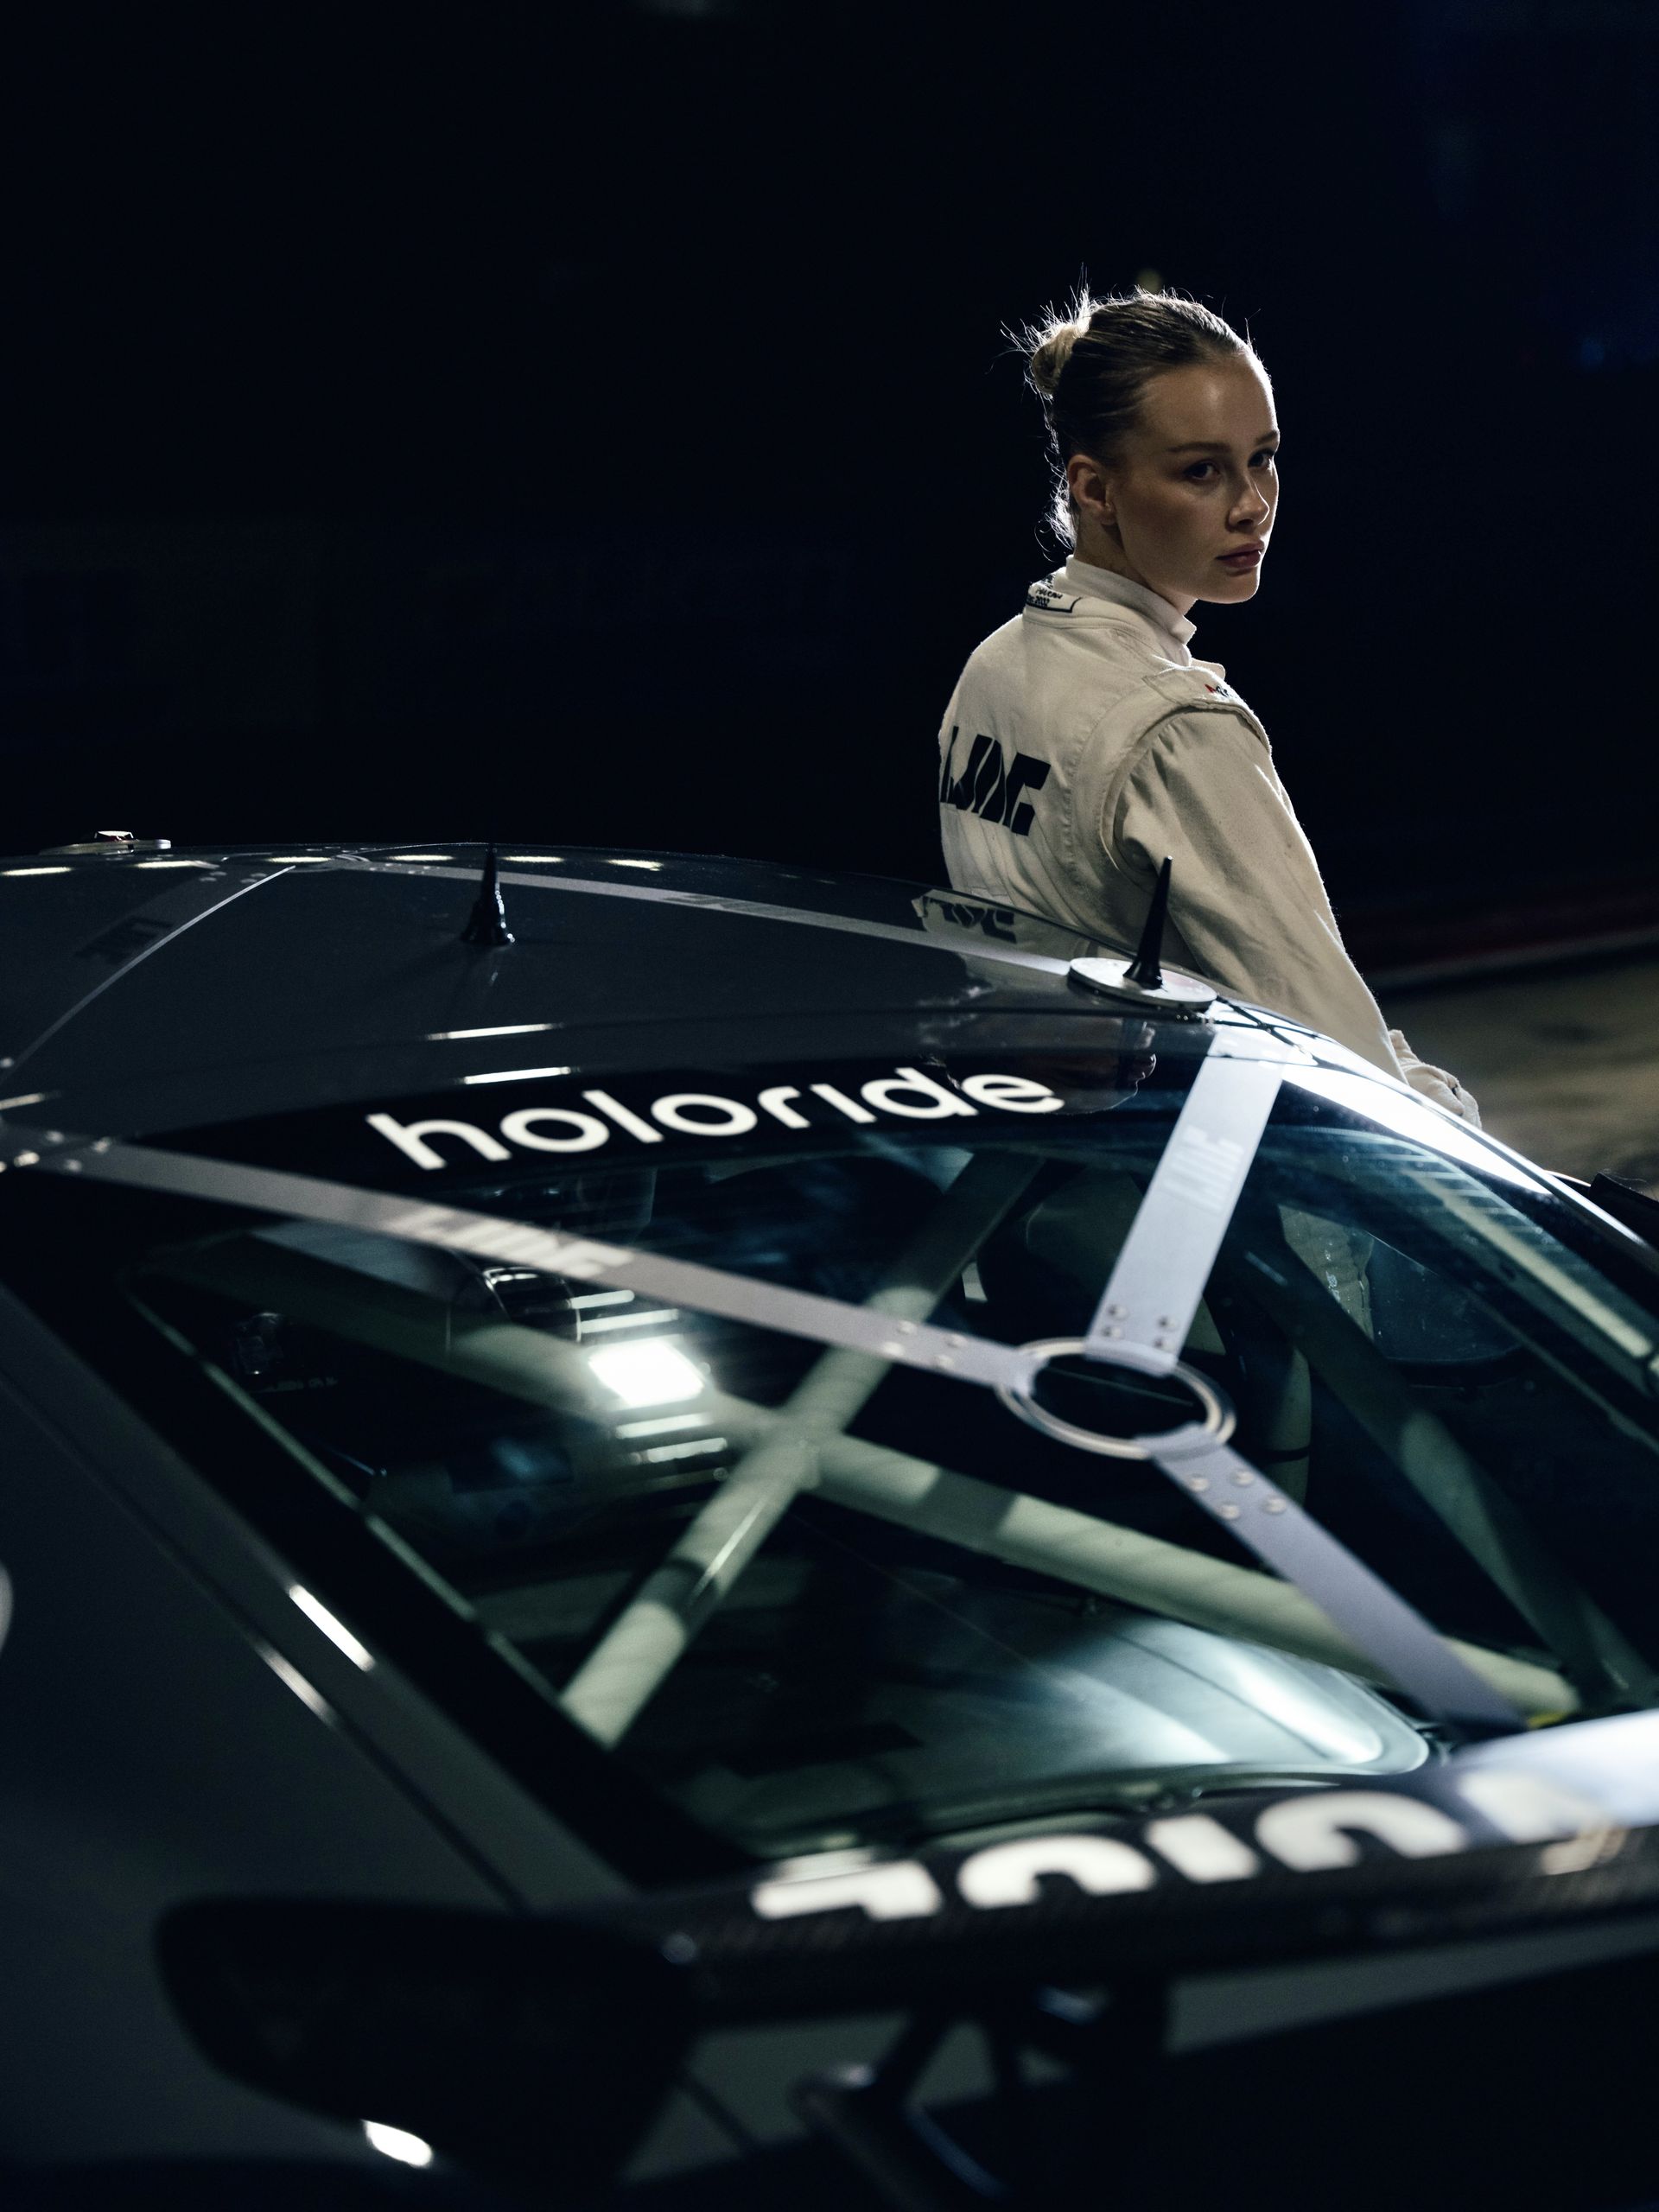 Laura-Marie-Geissler with Porsche car and holoride branding